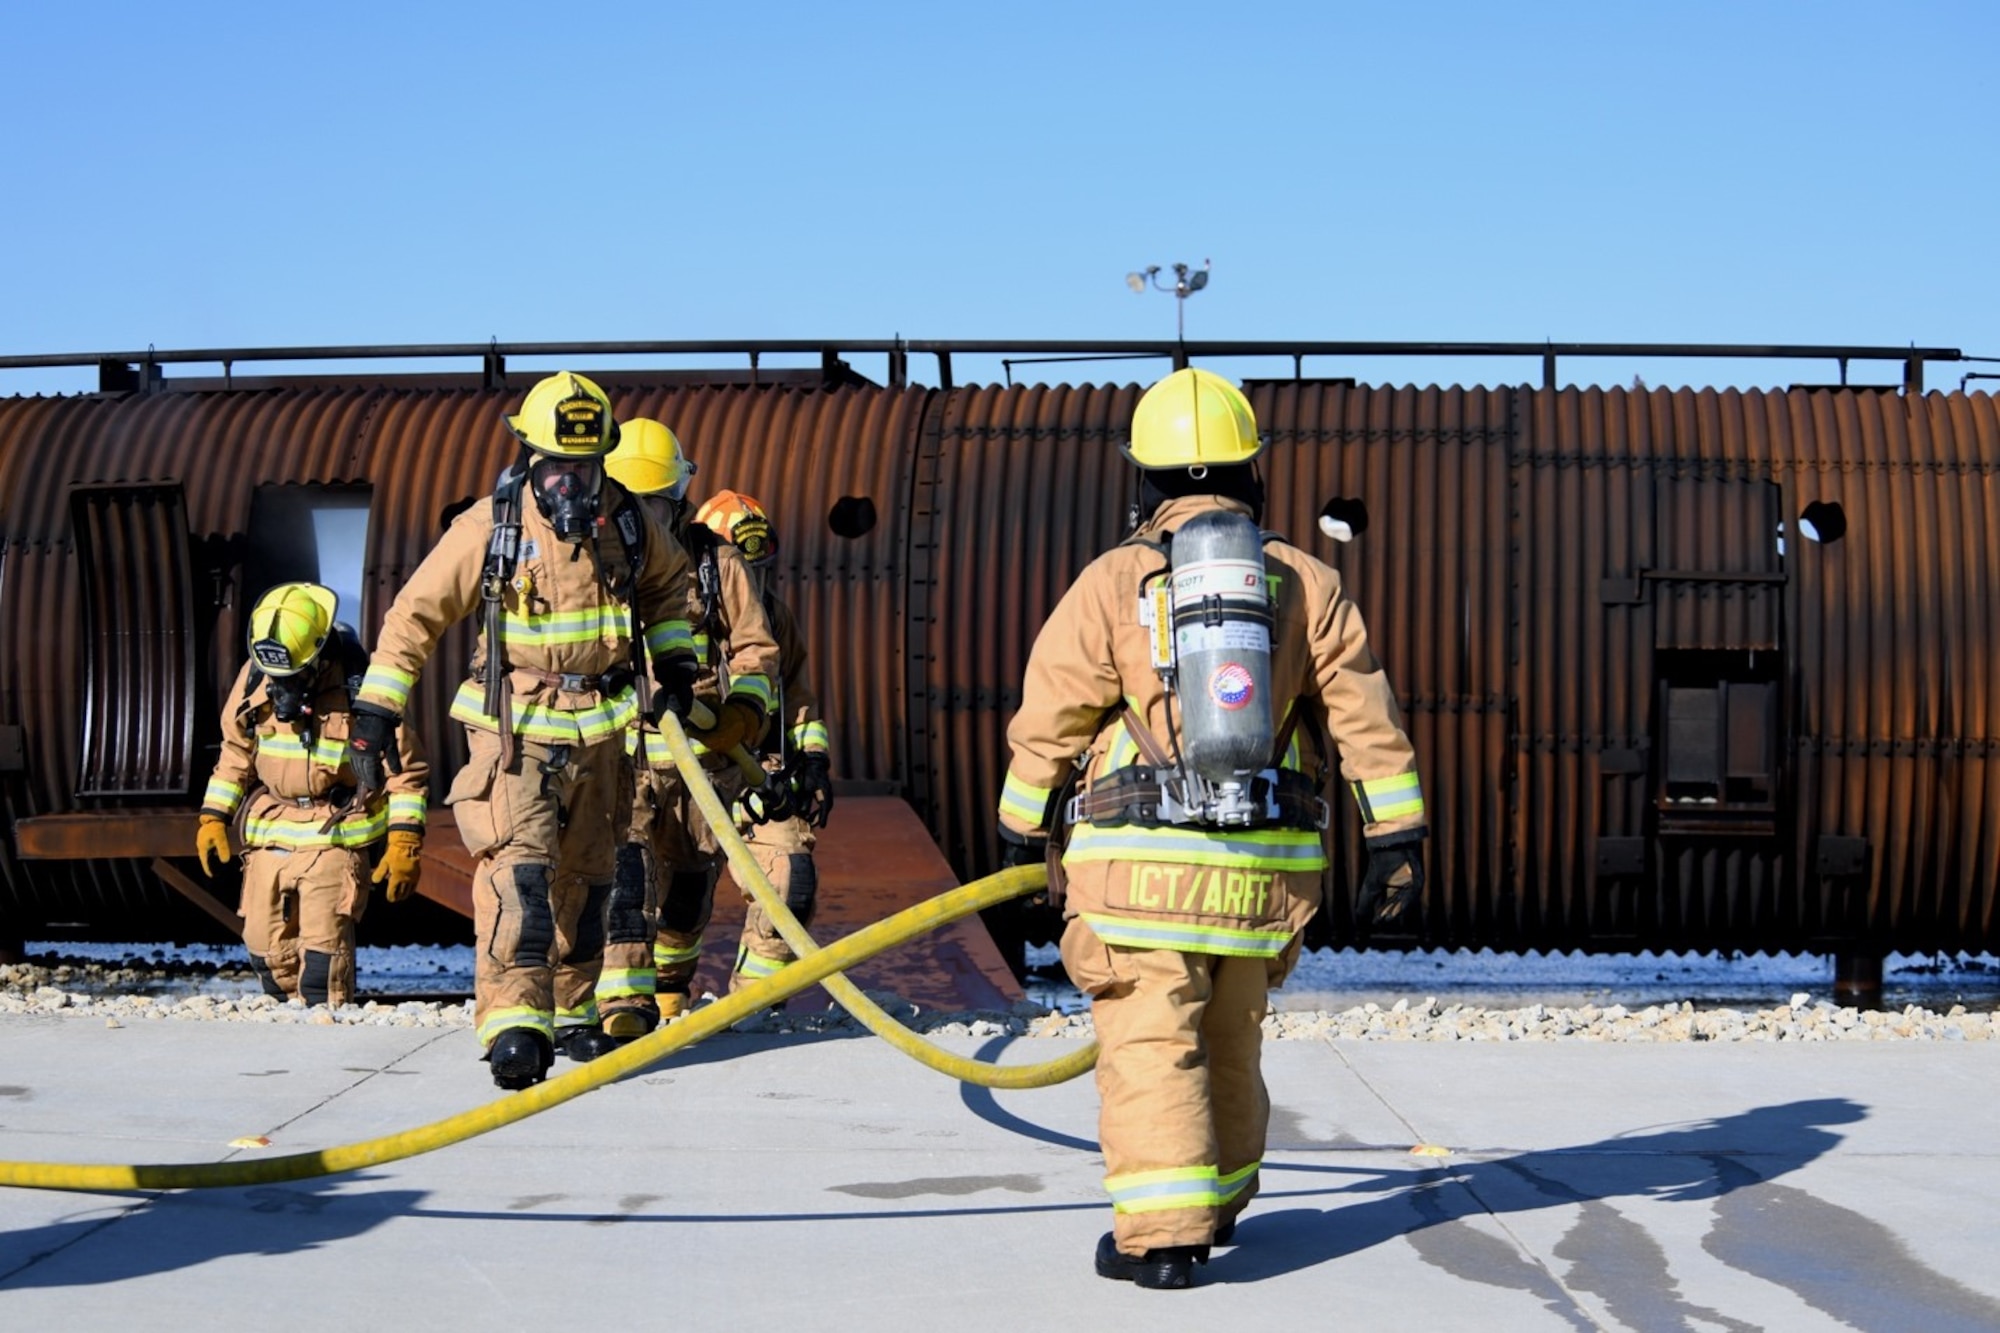 Firefighters from the Wichita Airport Police and Fire Department depart the training aircraft after putting out an interior fire Oct. 21, 2019, at McConnell Air Force Base, Kan. The fires were controlled by an individual in a tower that moderated the distribution of liquid propane through an electronic control system. The liquid propane was then ignited by spark plugs embedded throughout the training aircraft. (U.S. Air Force photo by Airman 1st Class Nilsa E. Garcia)